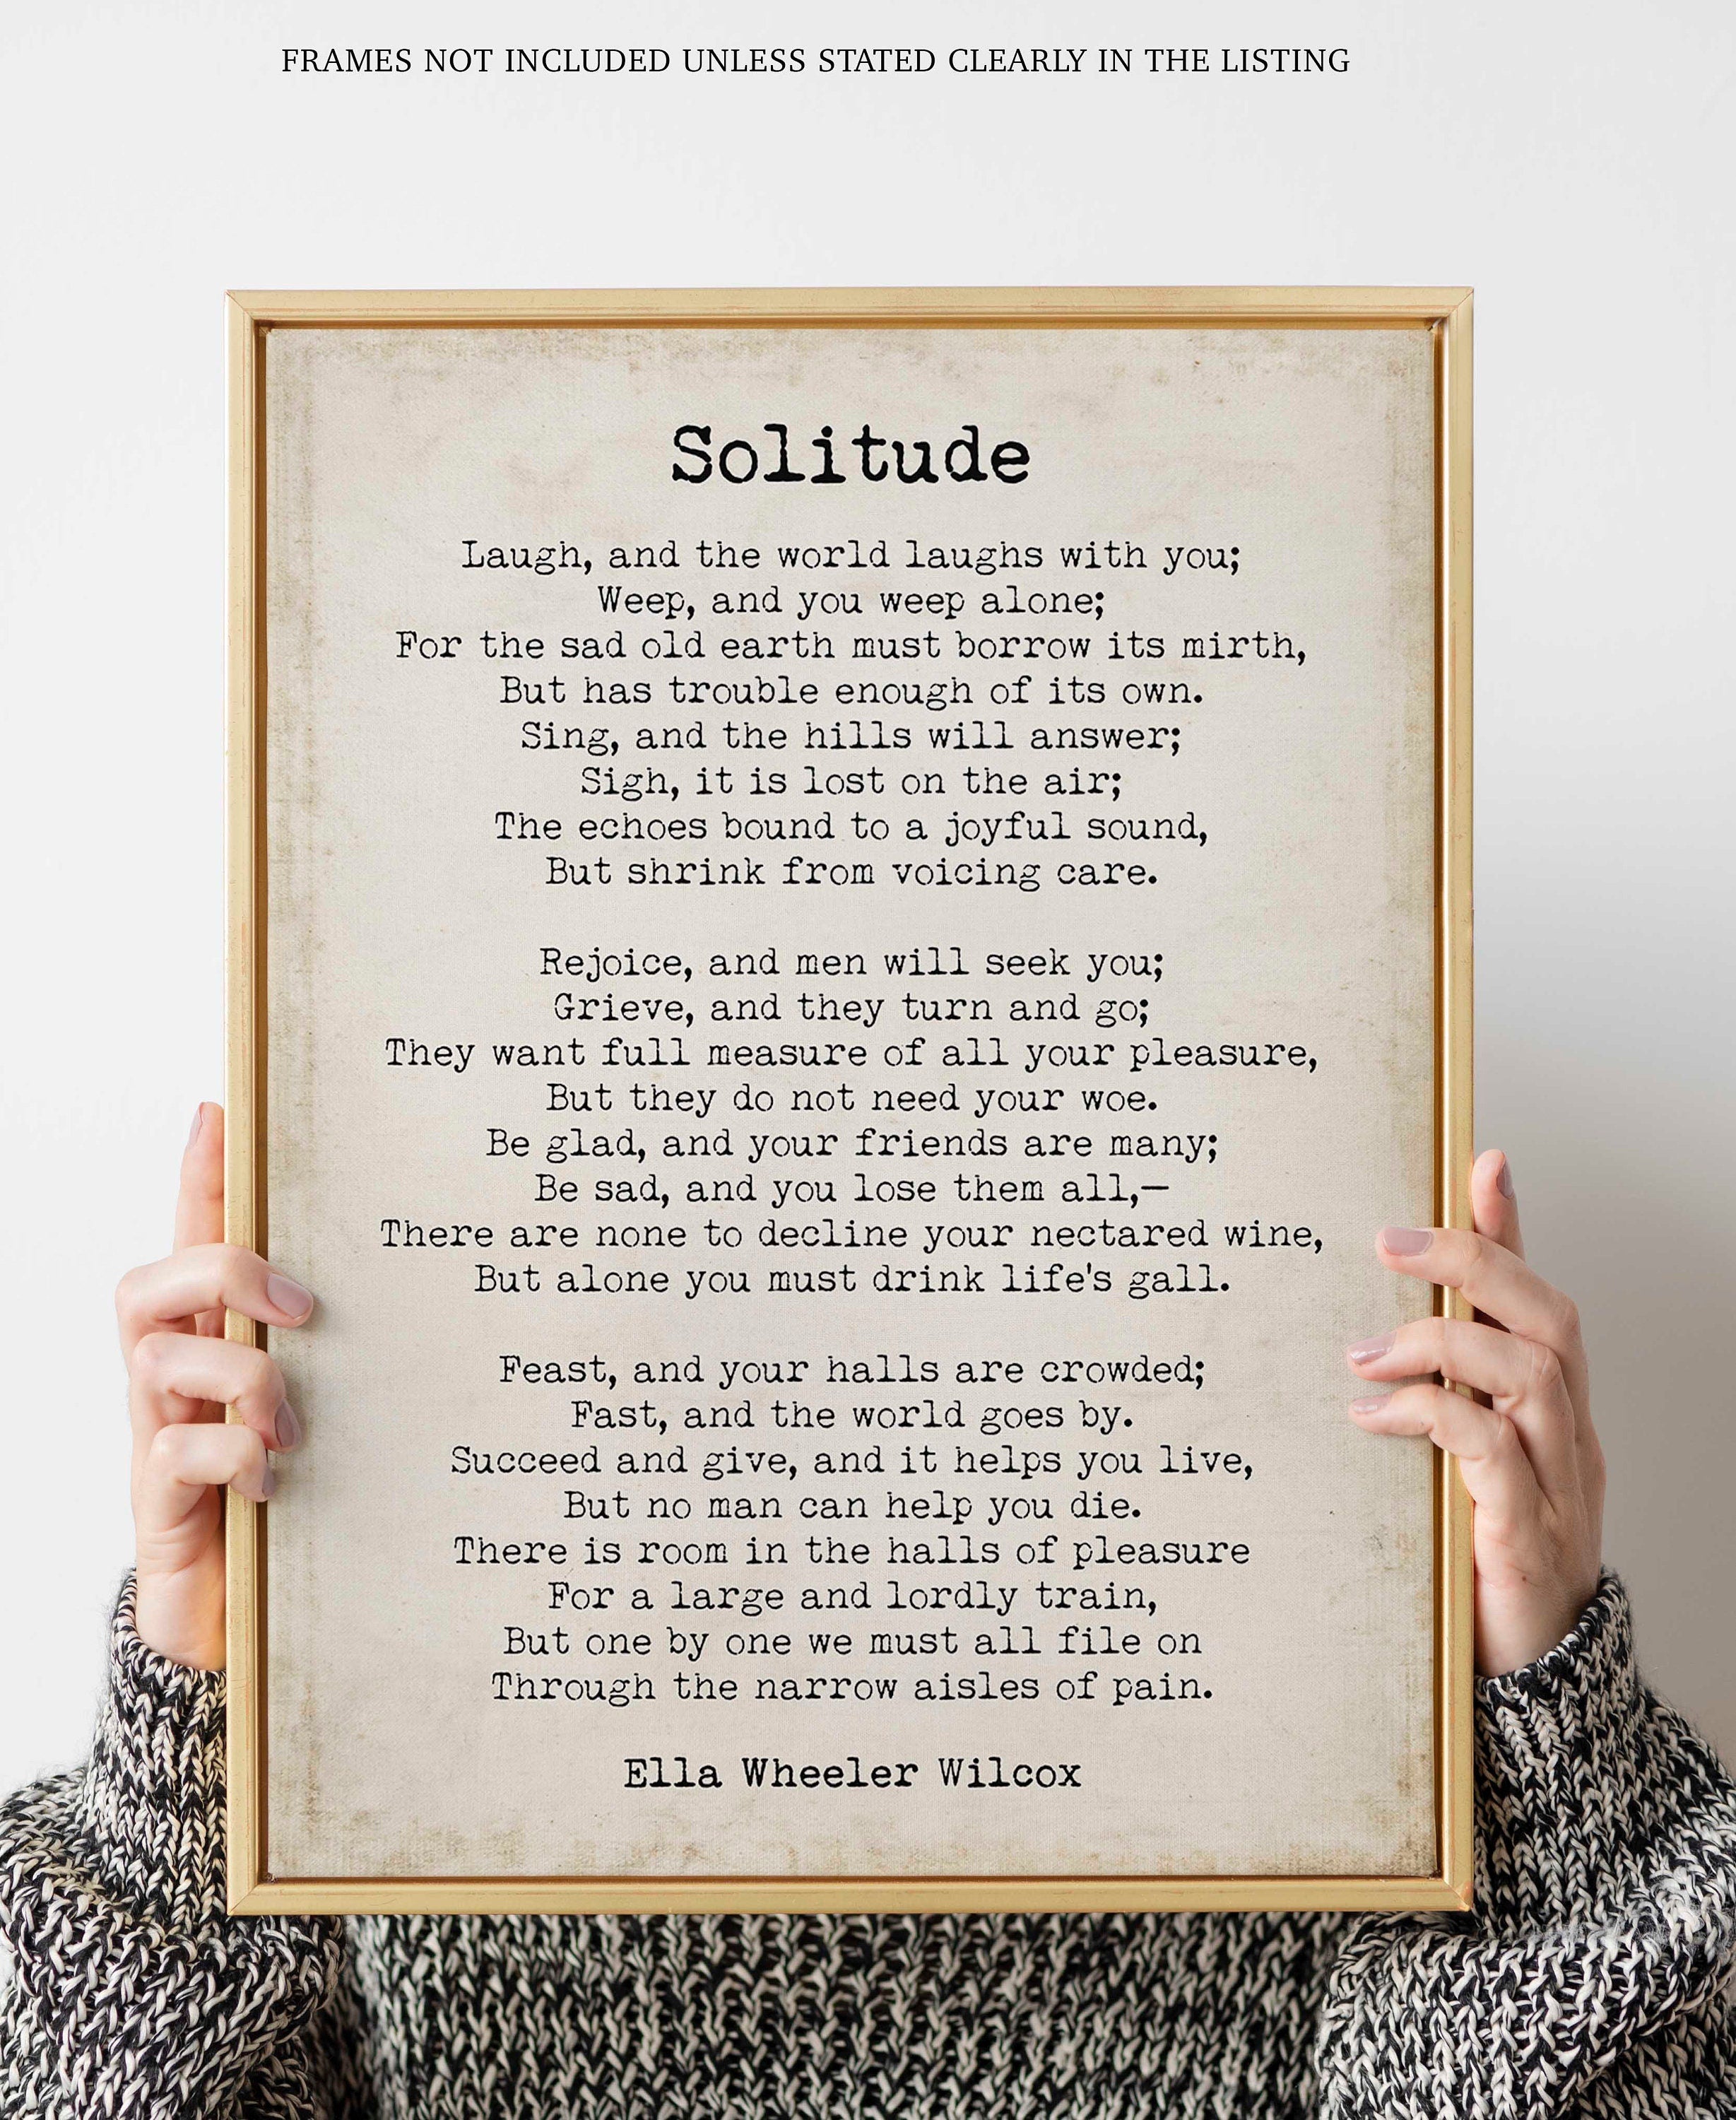 Solitude Ella Wheeler Wilcox poem wall art print, literary gift poetry print unframed in vintage and black & white background